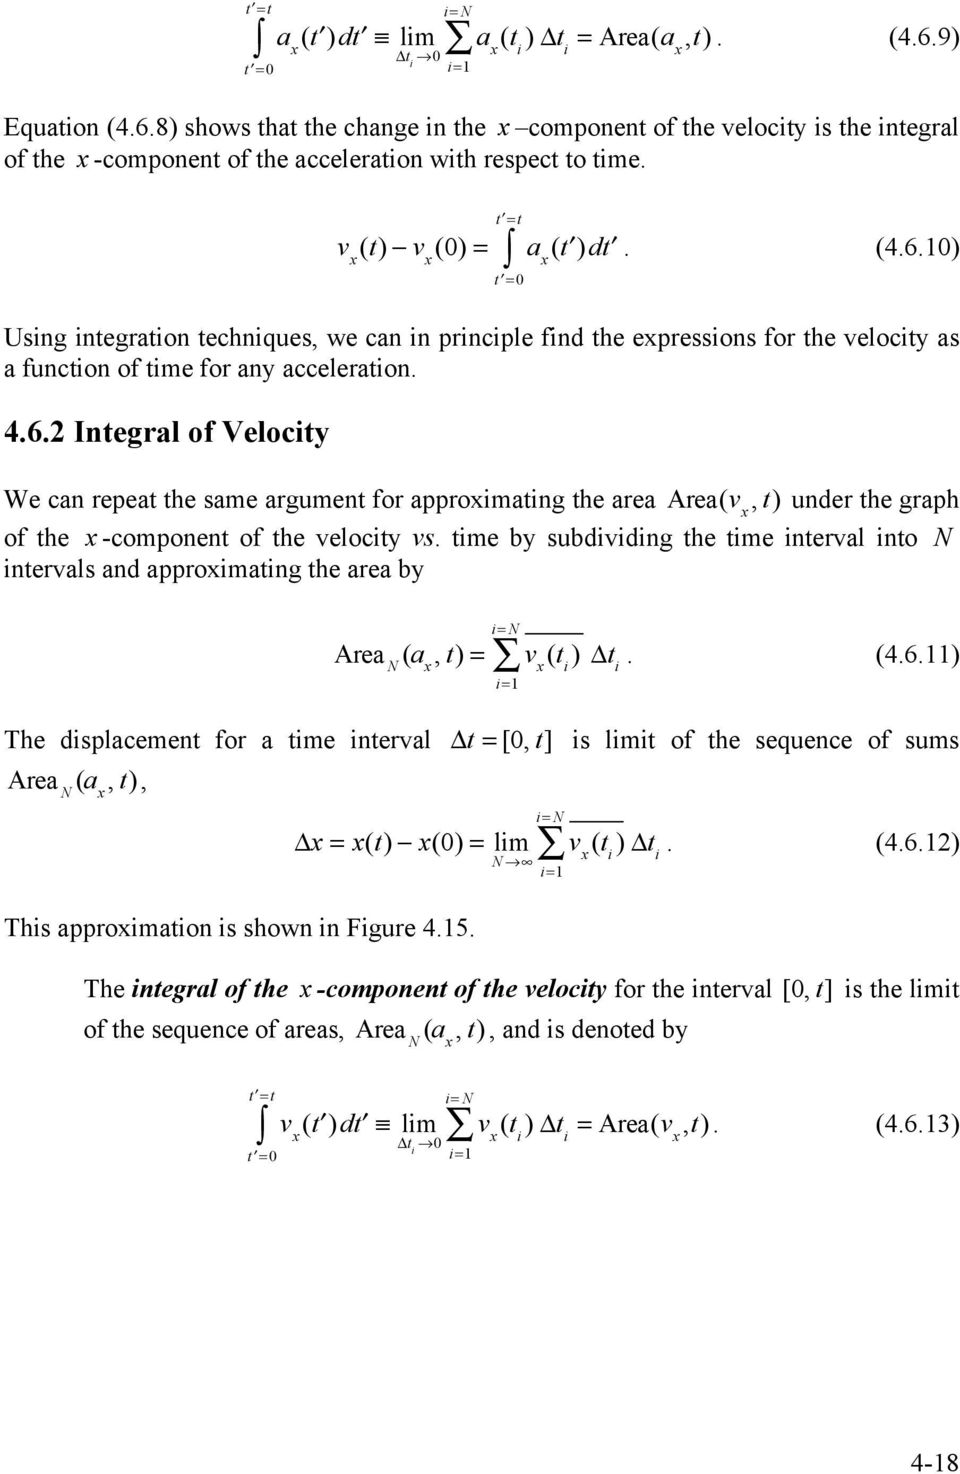 Velocity We can repeat the same argument for approimating the area Area(v, t) under the graph of the -component of the velocity vs time by subdividing the time interval into N intervals and